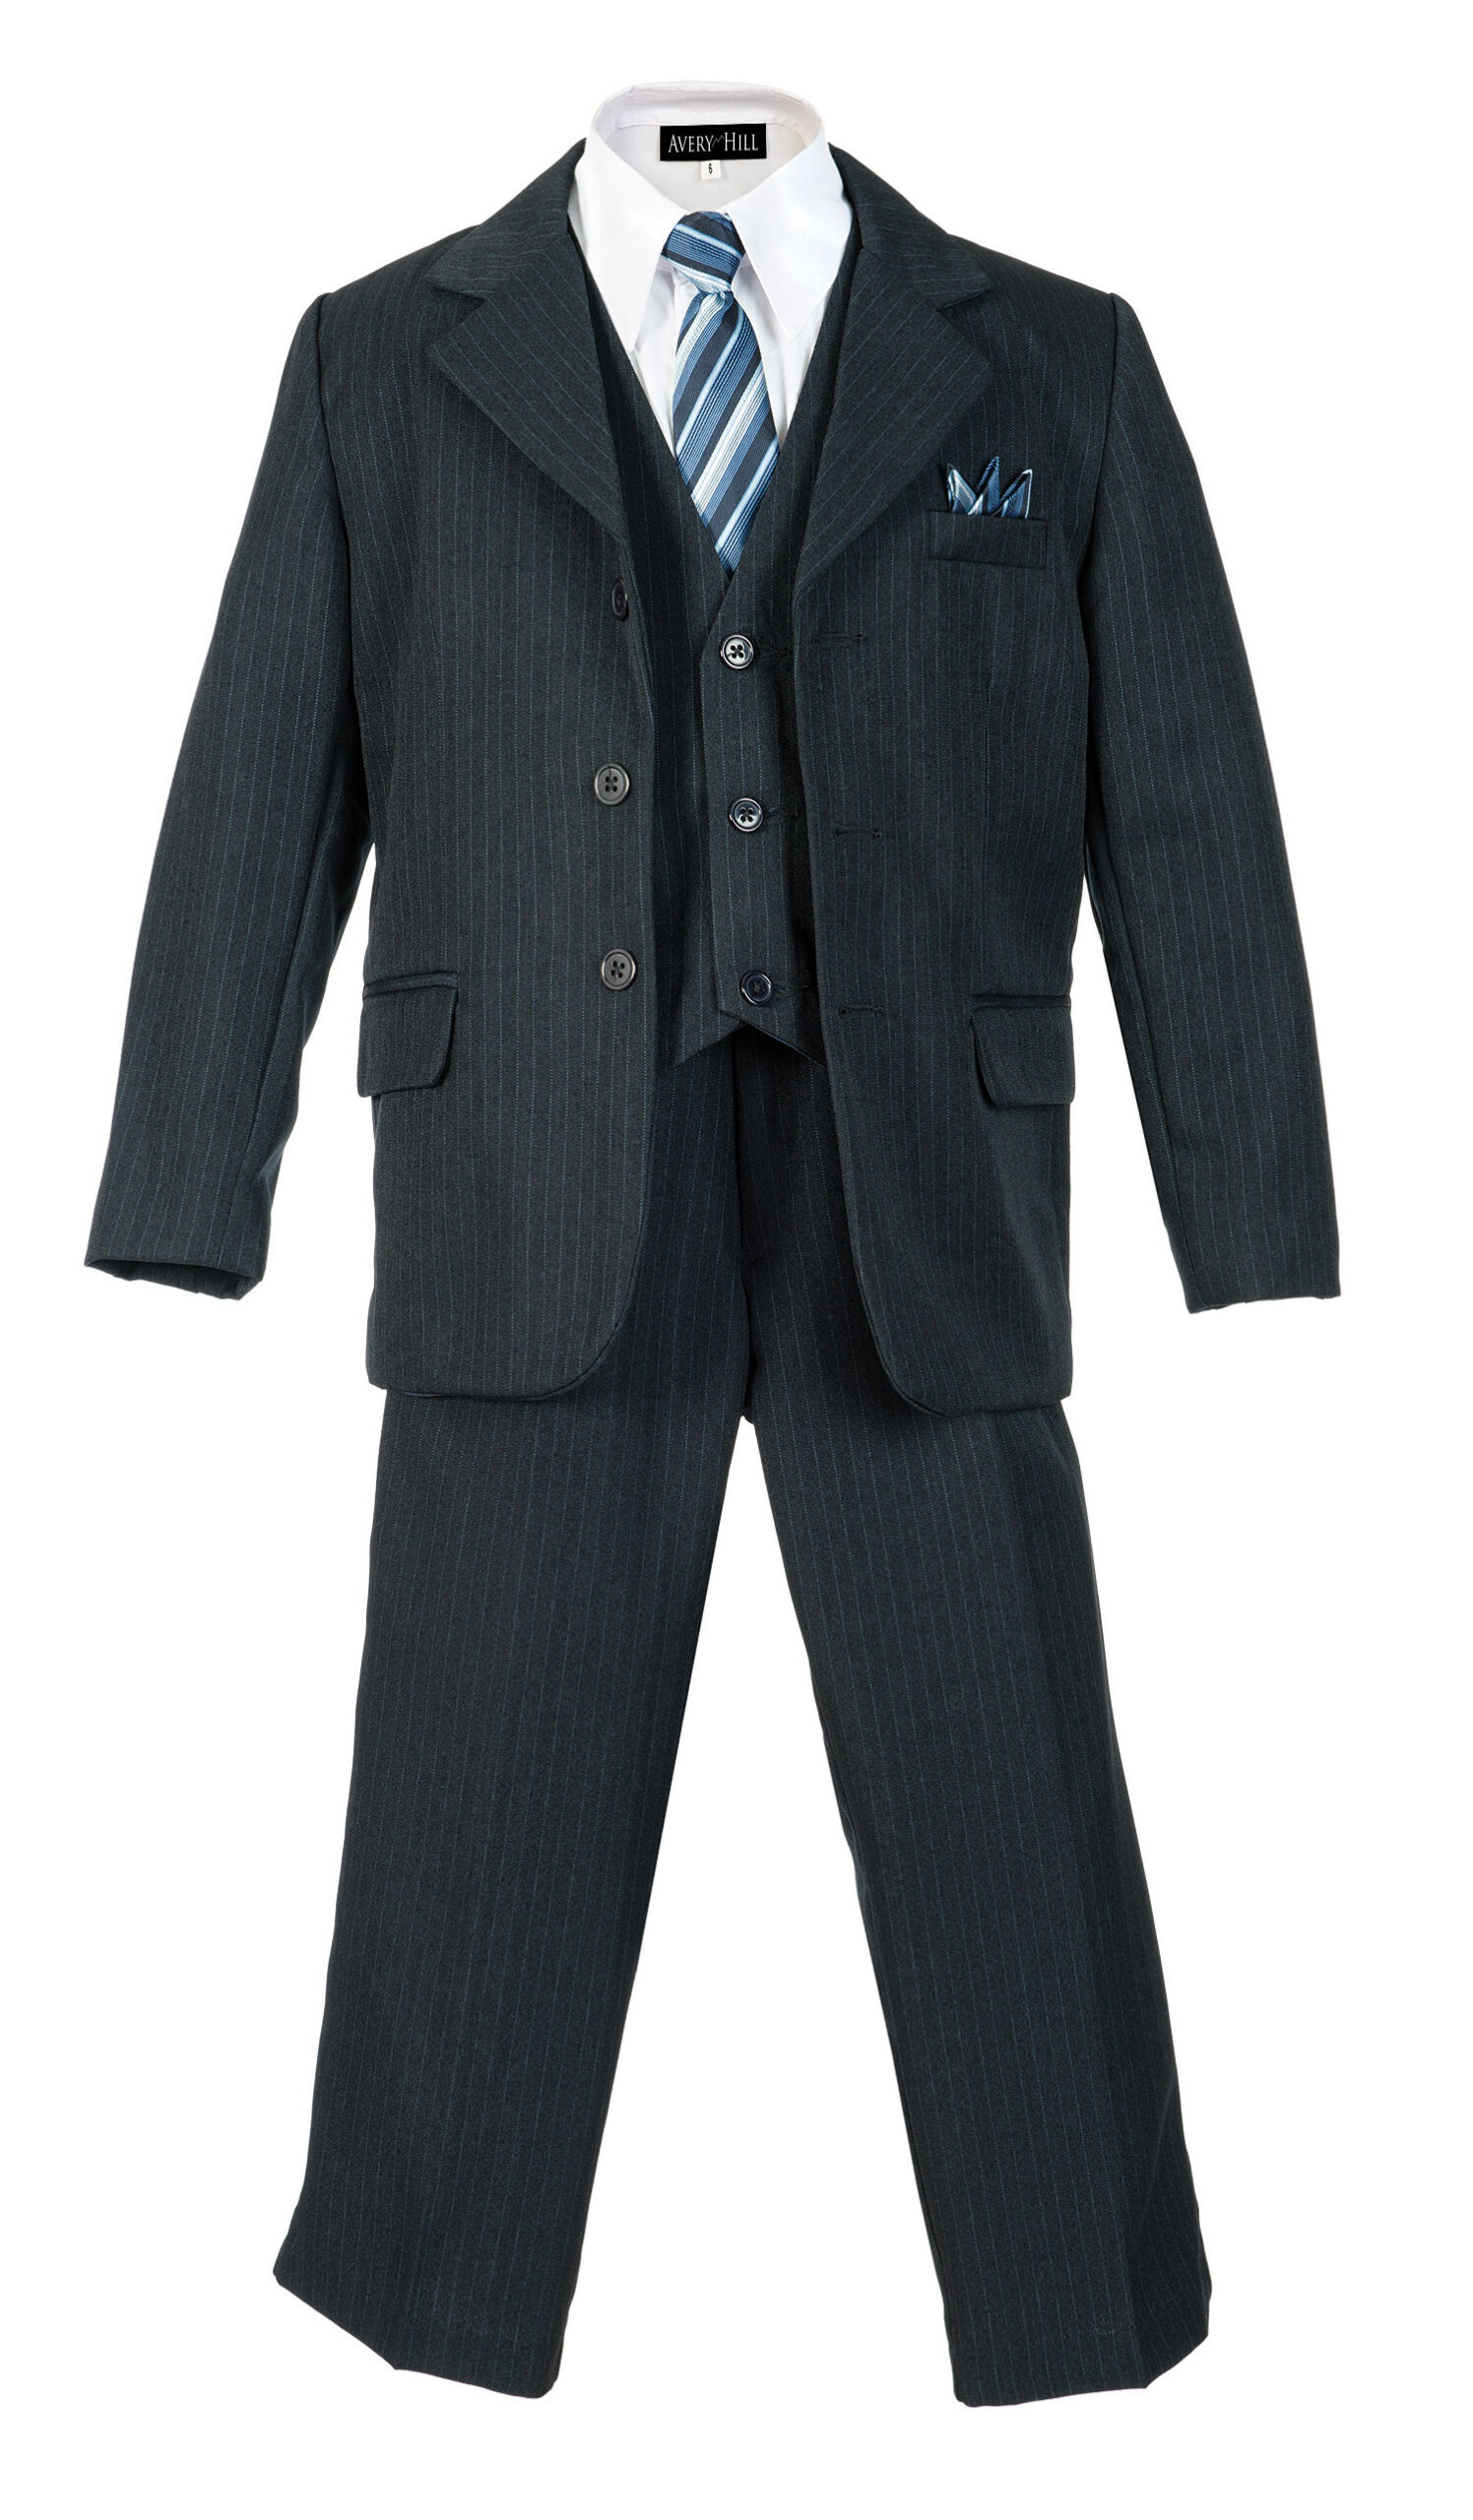 Boys Pinstripe Suit Set with Matching Tie NB 12